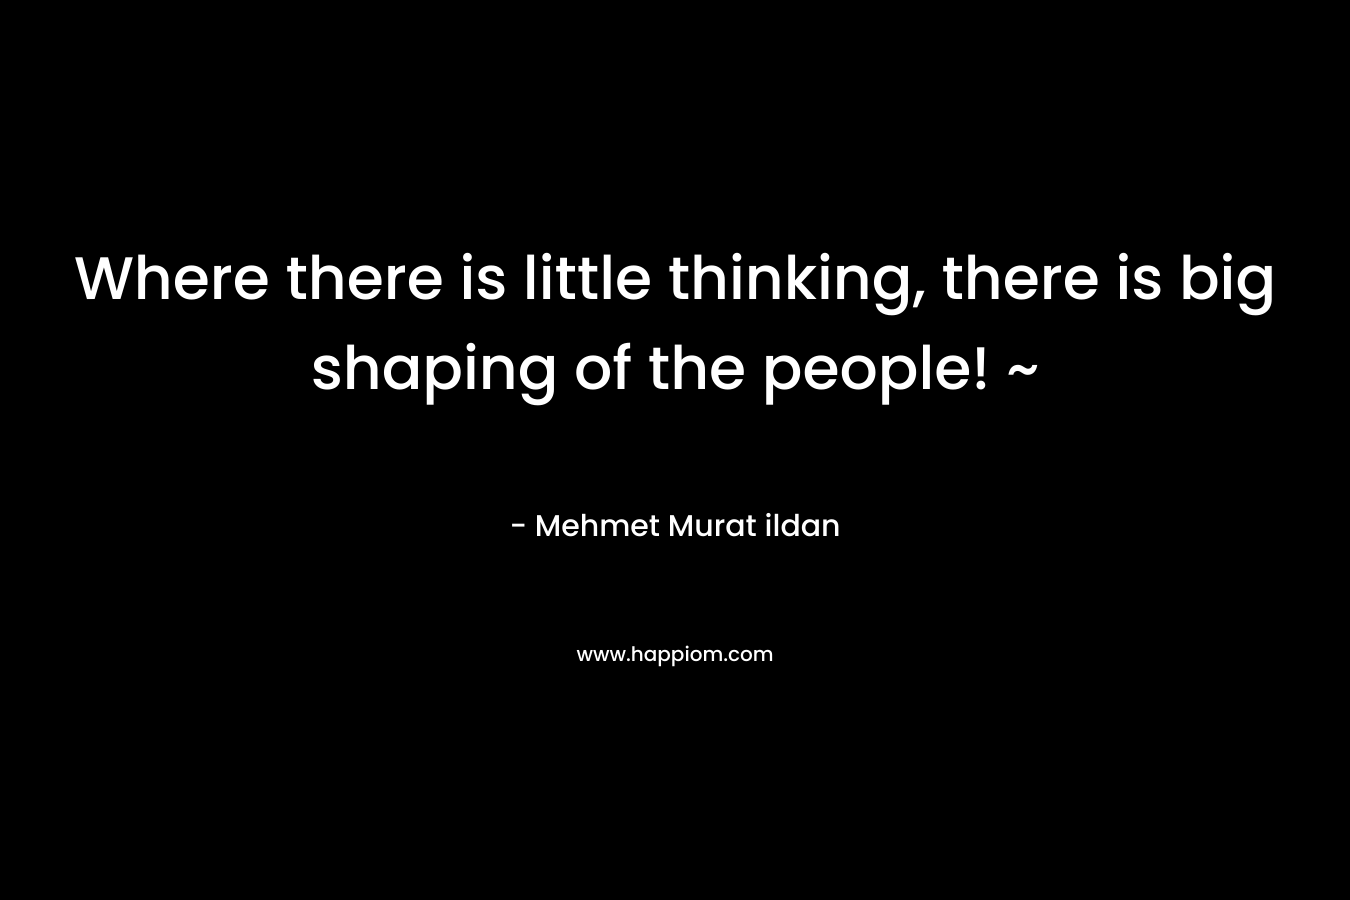 Where there is little thinking, there is big shaping of the people! ~